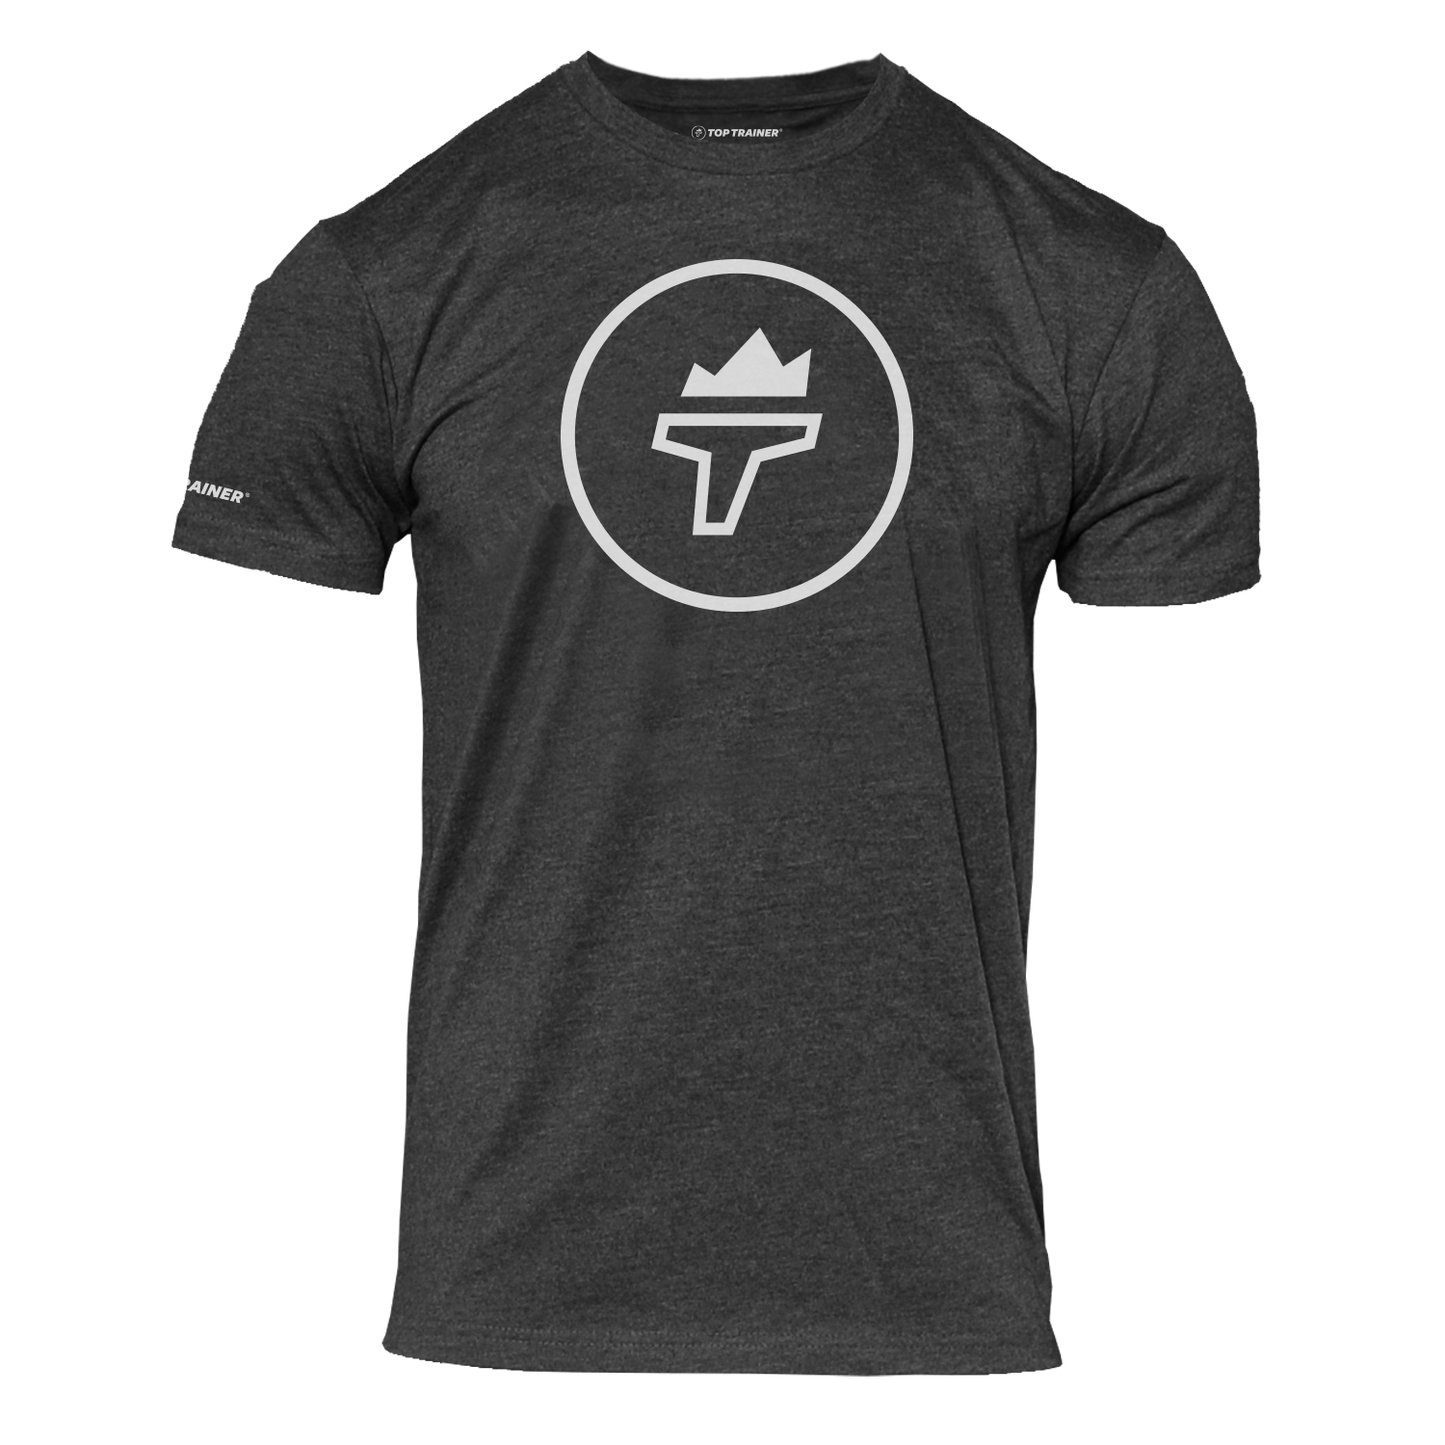 Rock the Torch Tee